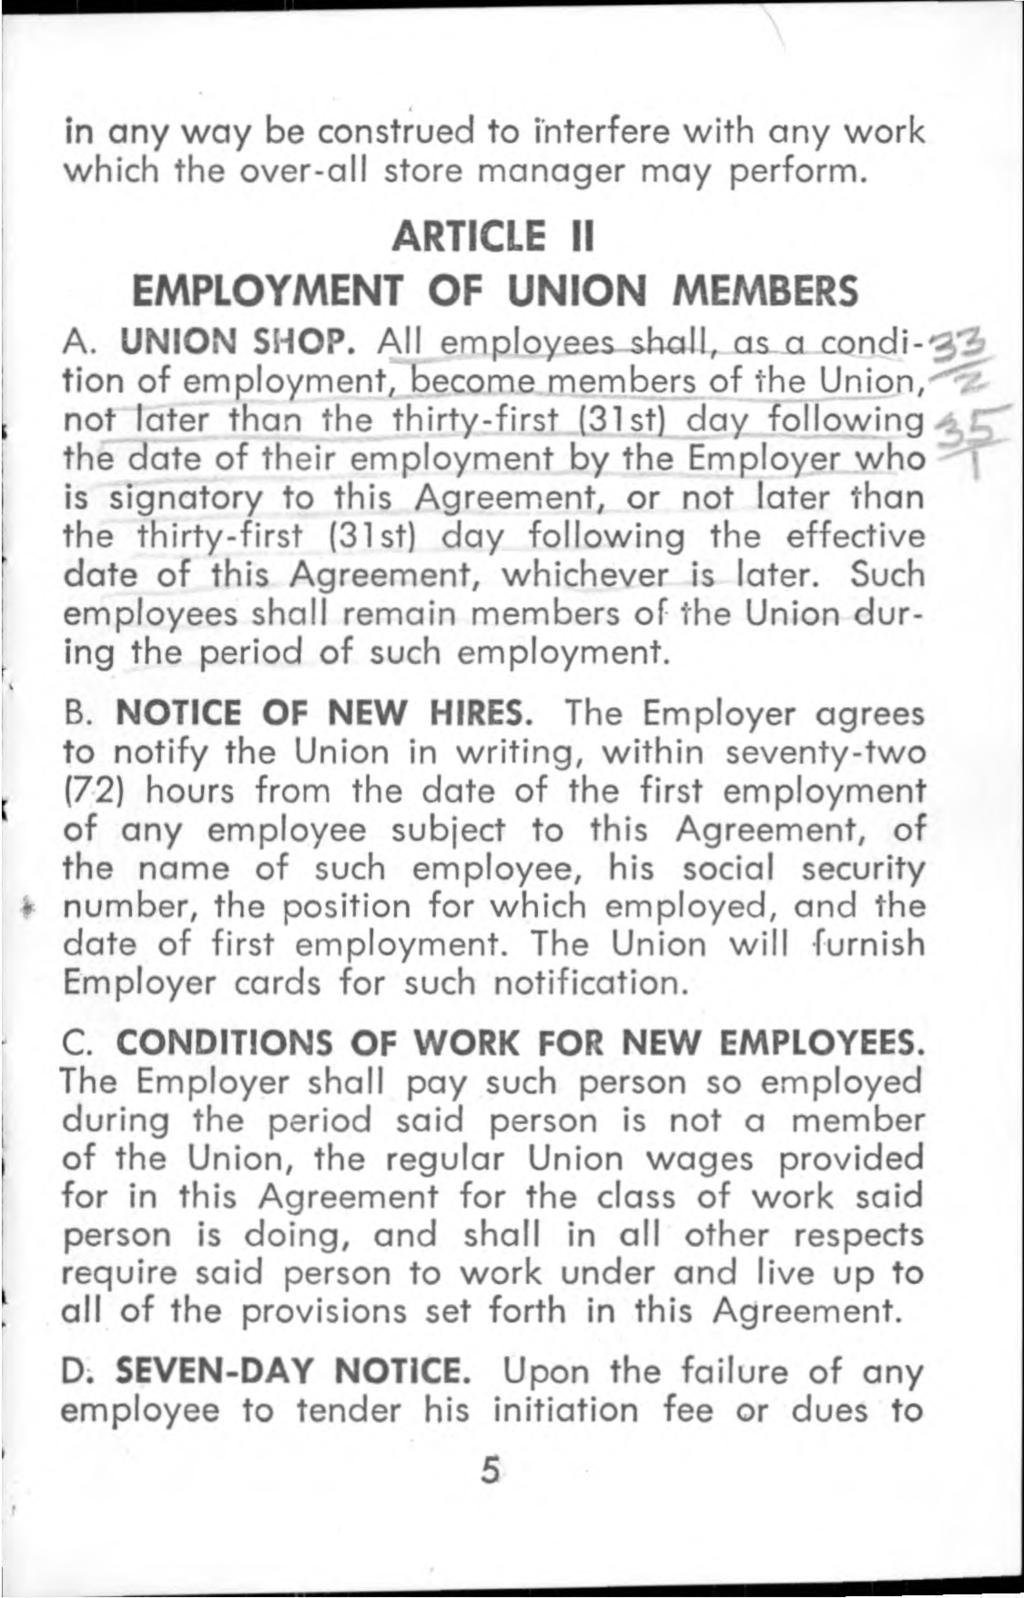 I in any w a y be construed to interfere w ith any w ork w hich the over-all store m anager m ay perform. ARTICLE II EMPLOYMENT OF UNION MEMBERS A. UNION SHOP.